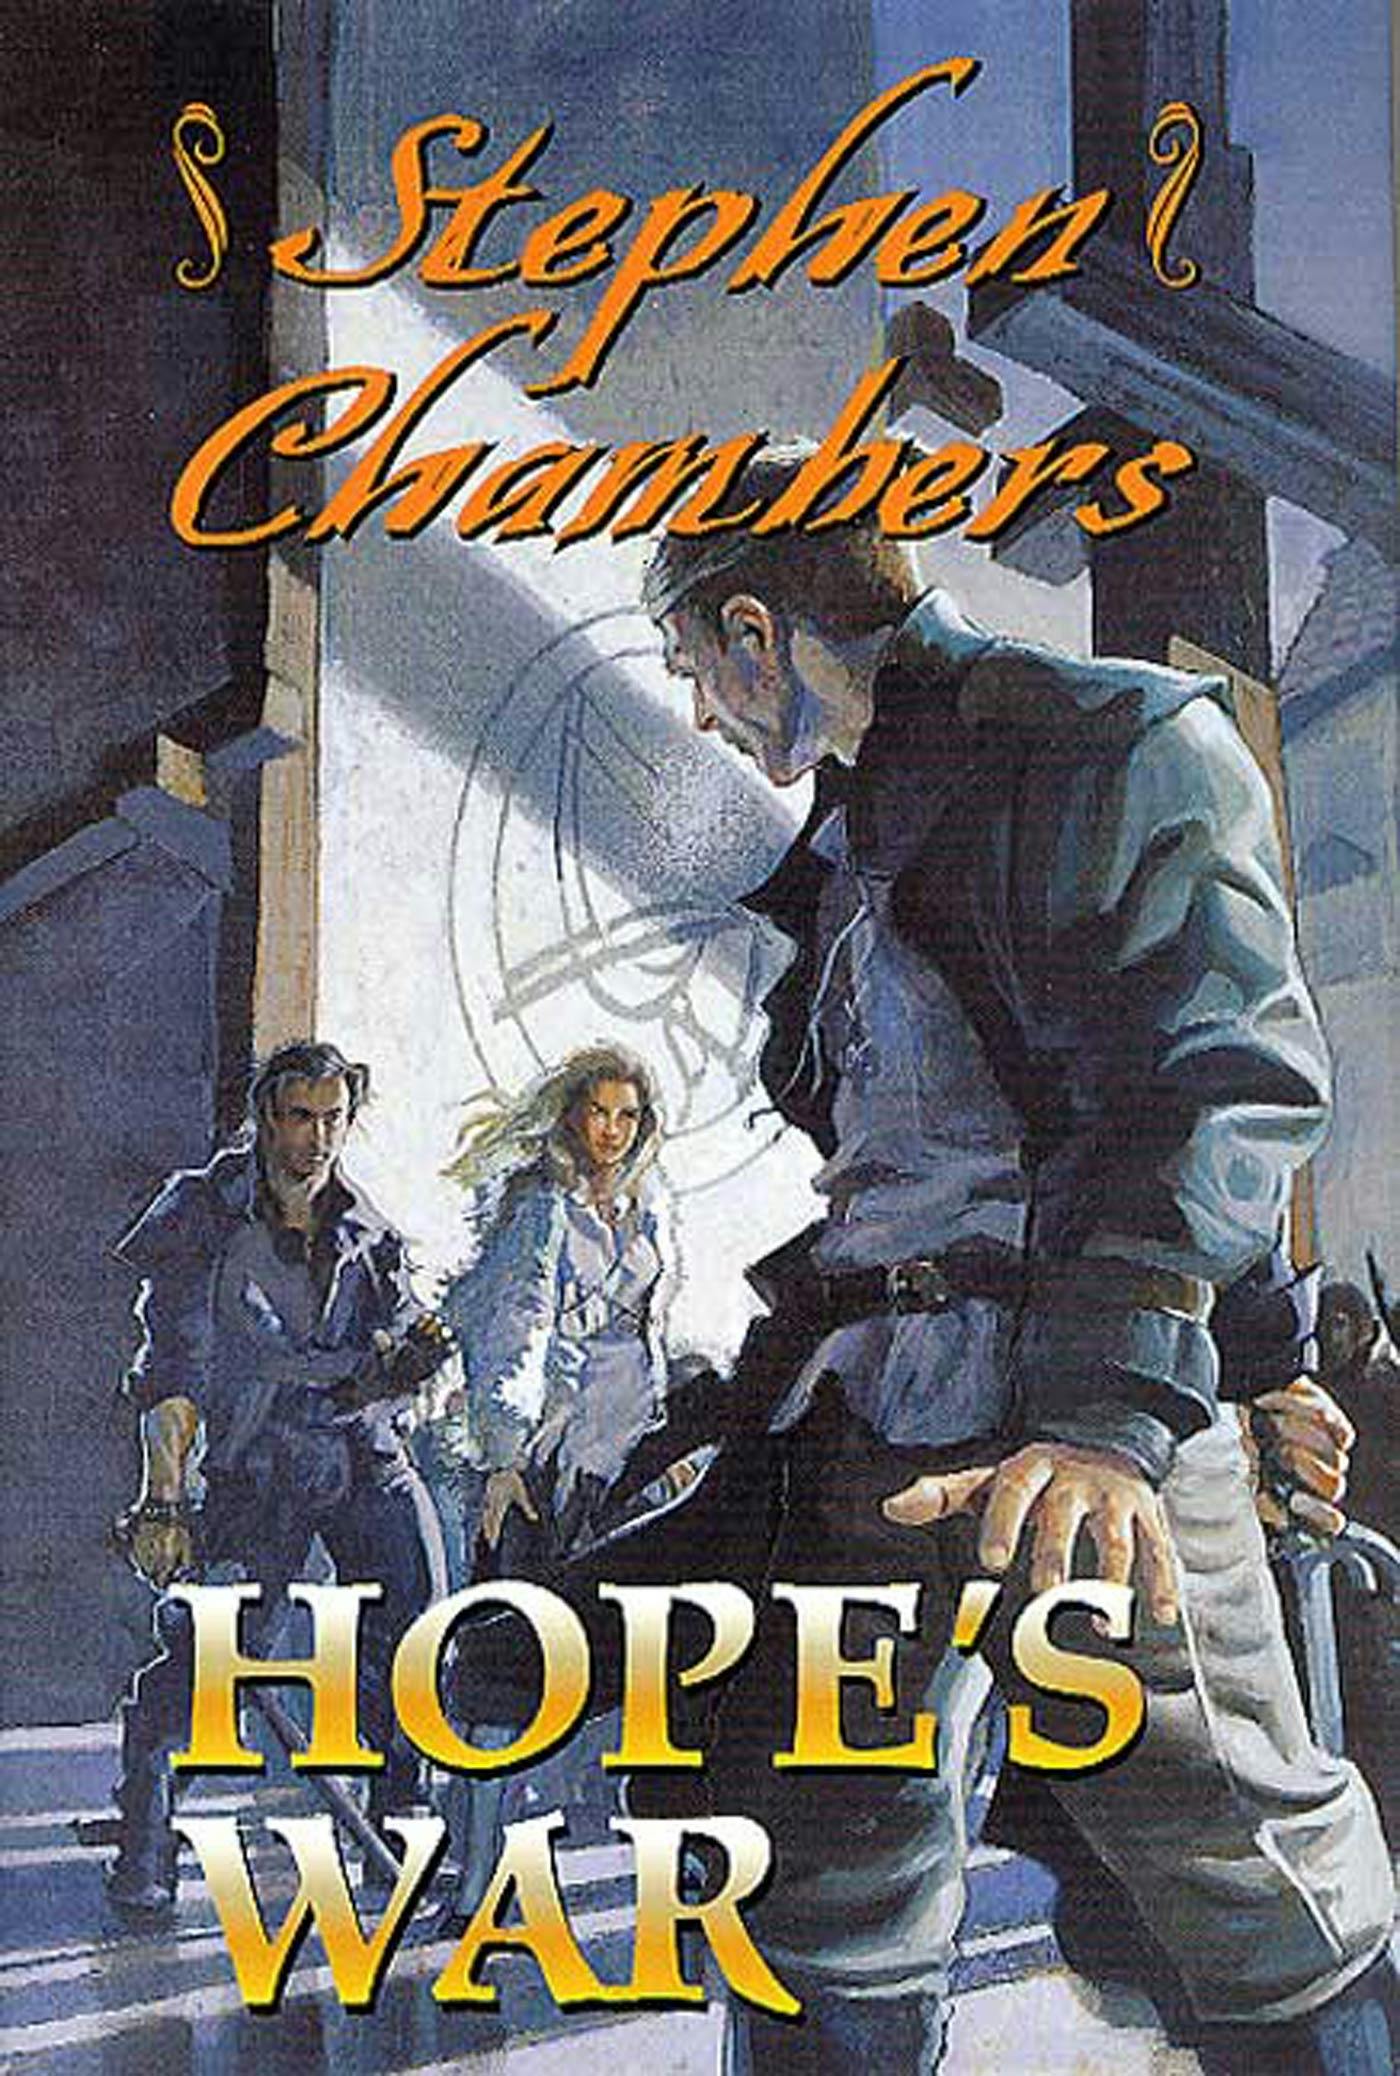 Cover for the book titled as: Hope's War